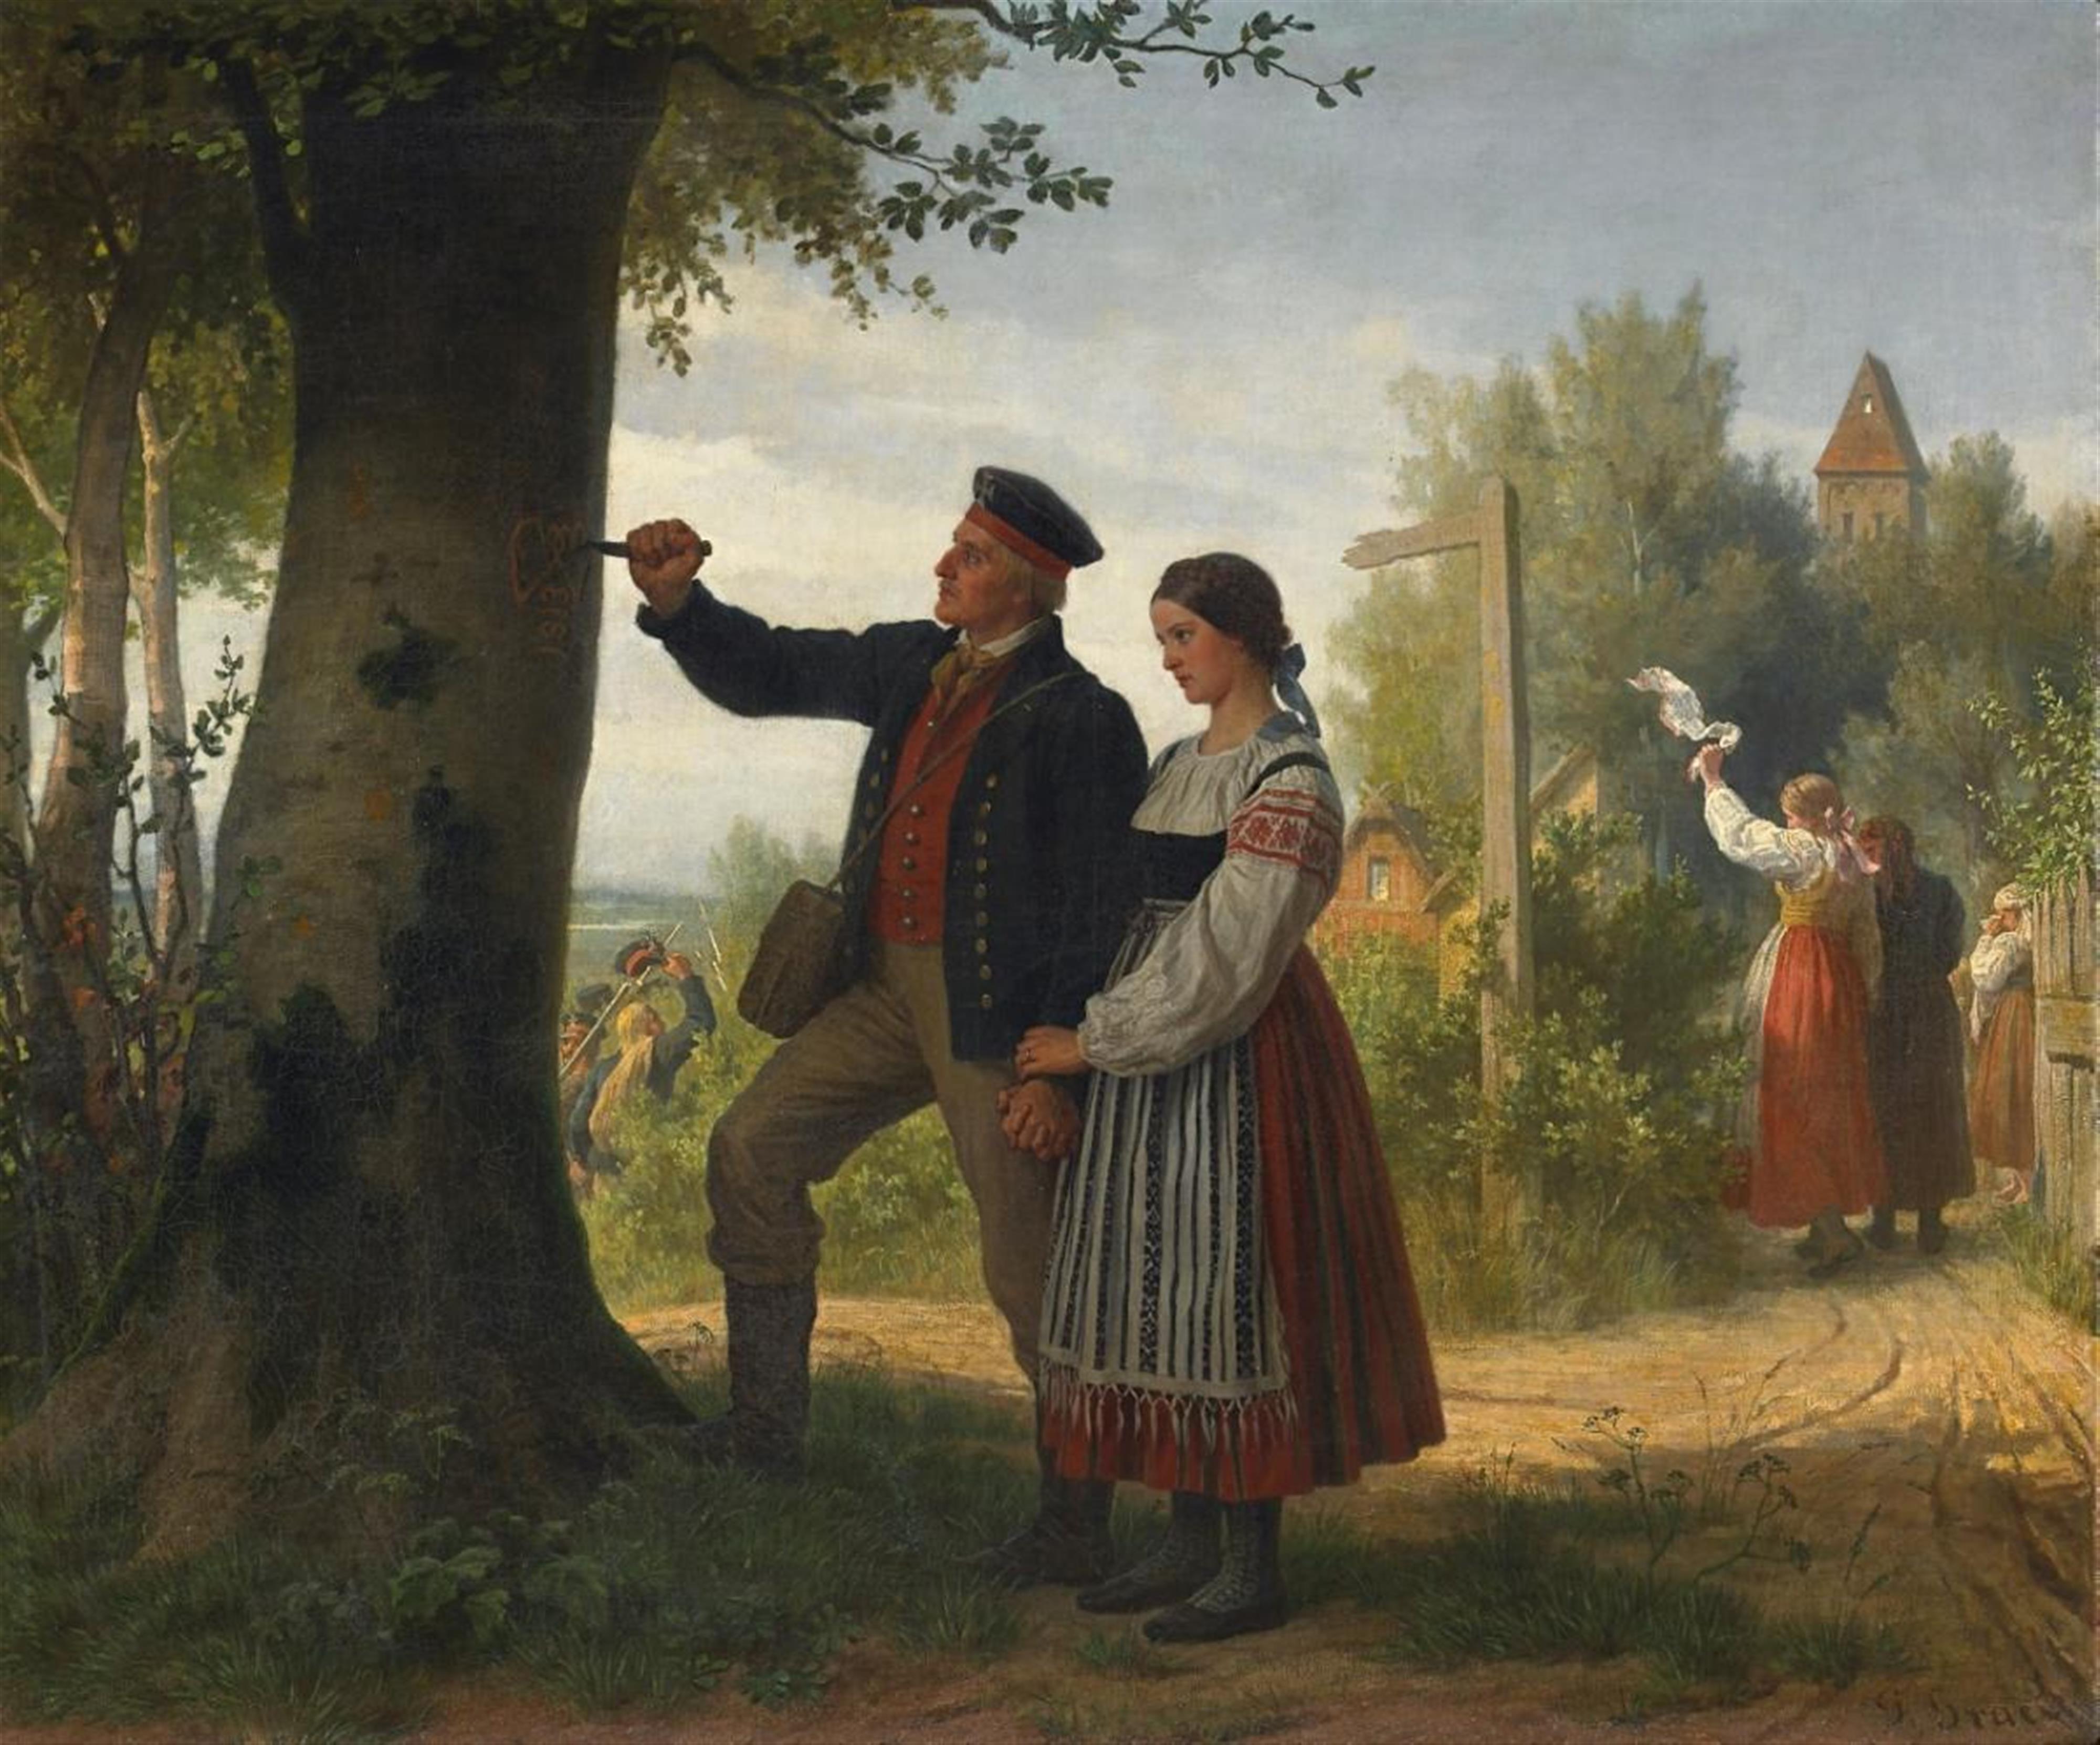 Gustav Graef - THE FAREWELL OF THE LITUANIAN LANDWEHR SOLDIER - image-1